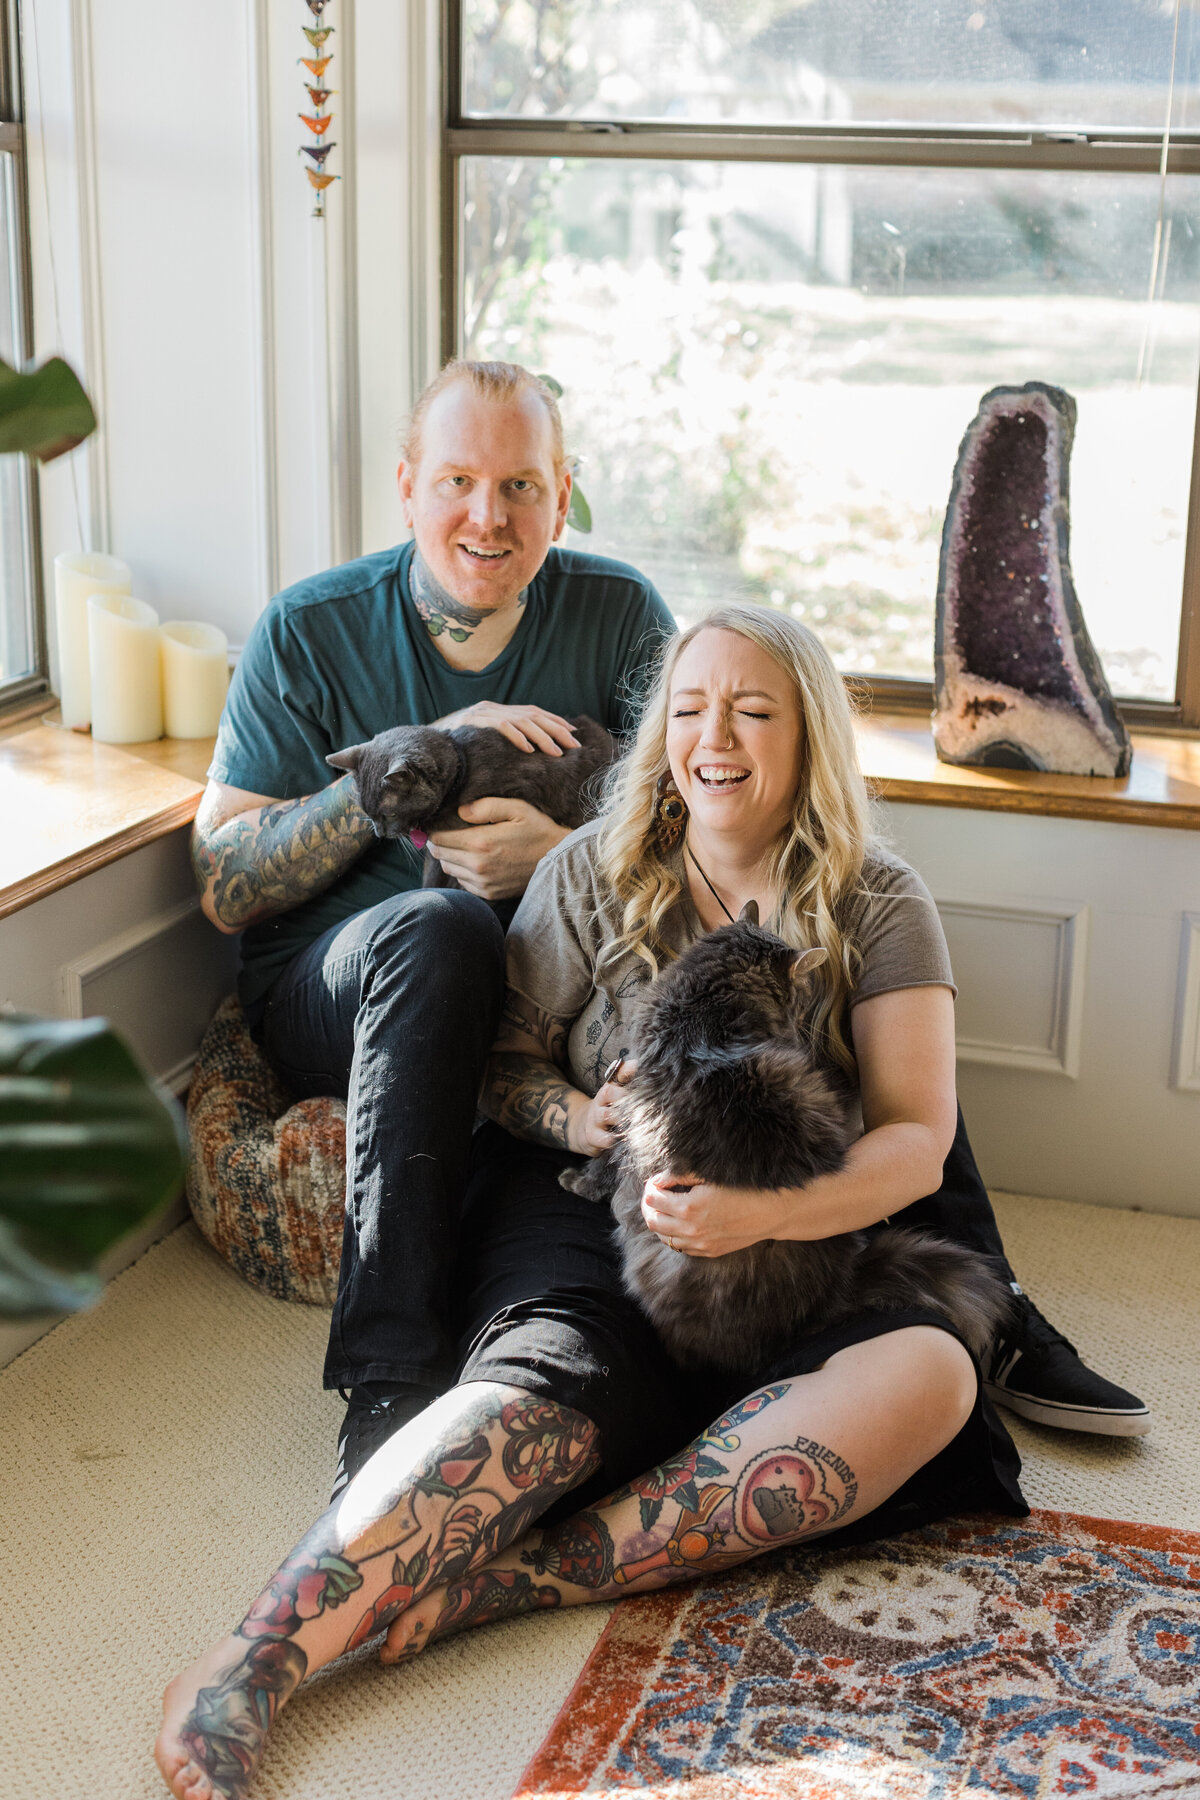 A couple casually posing with their two cats in their home during their engagement session in DFW, Texas. The woman on the right is seated on the floor and is laughing with a large, fluffy cat in her lap. She is wearing a t-shirt and shorts and has many tattoos on her legs and right arm. The man on the left is seated on a cushion and is holding and petting a short hair cat. He's wearing a t-shirt and pants and is also covered in many tattoos. A large geode sits beside them on a windowsill.